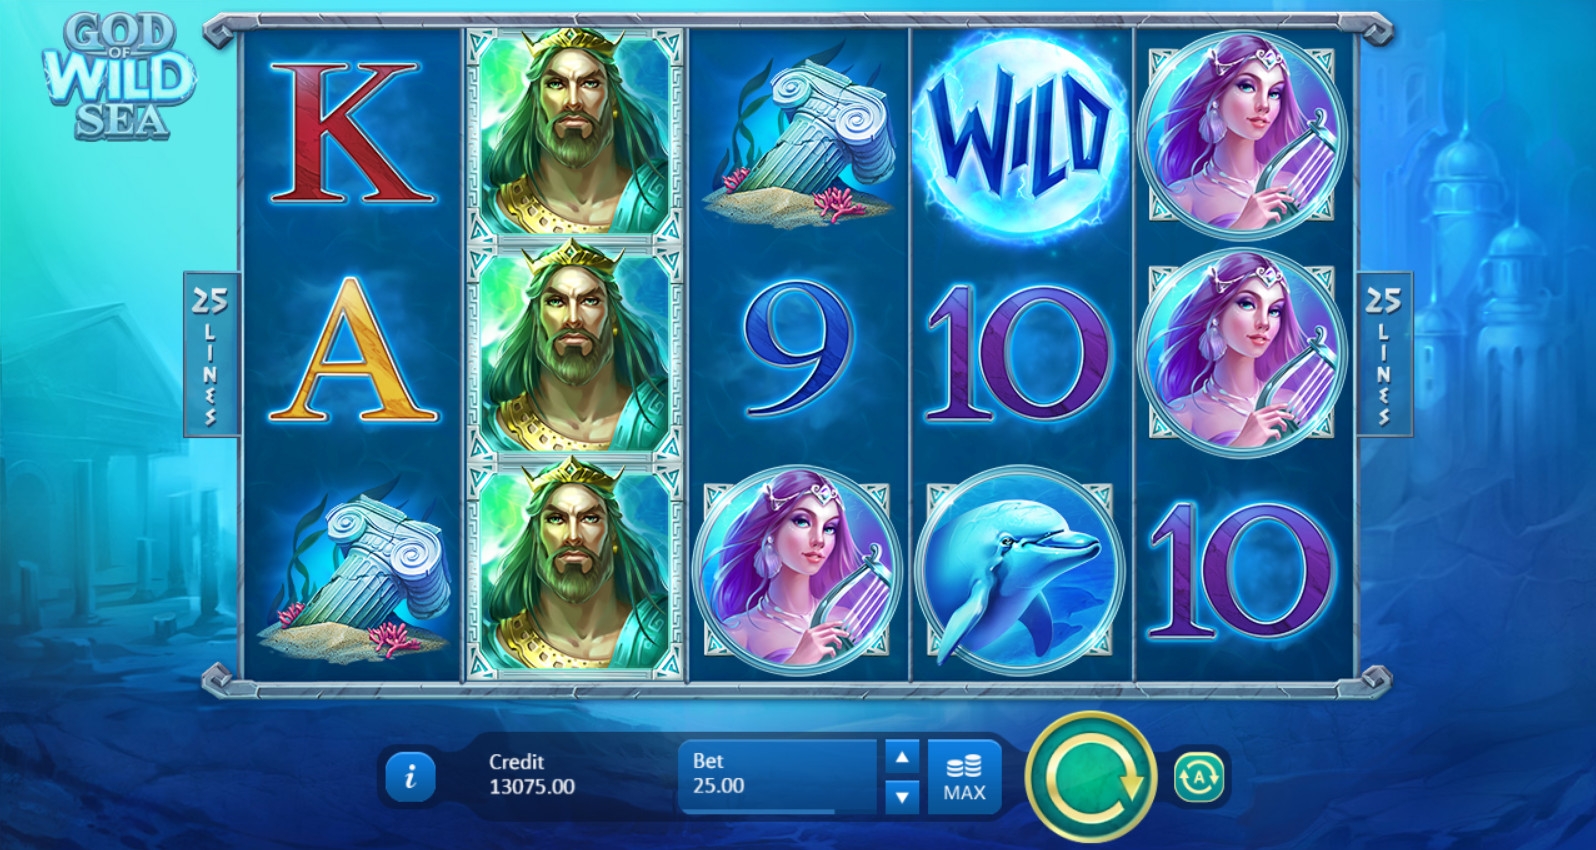 God of the Wild Sea (God of the Wild Sea) from category Slots